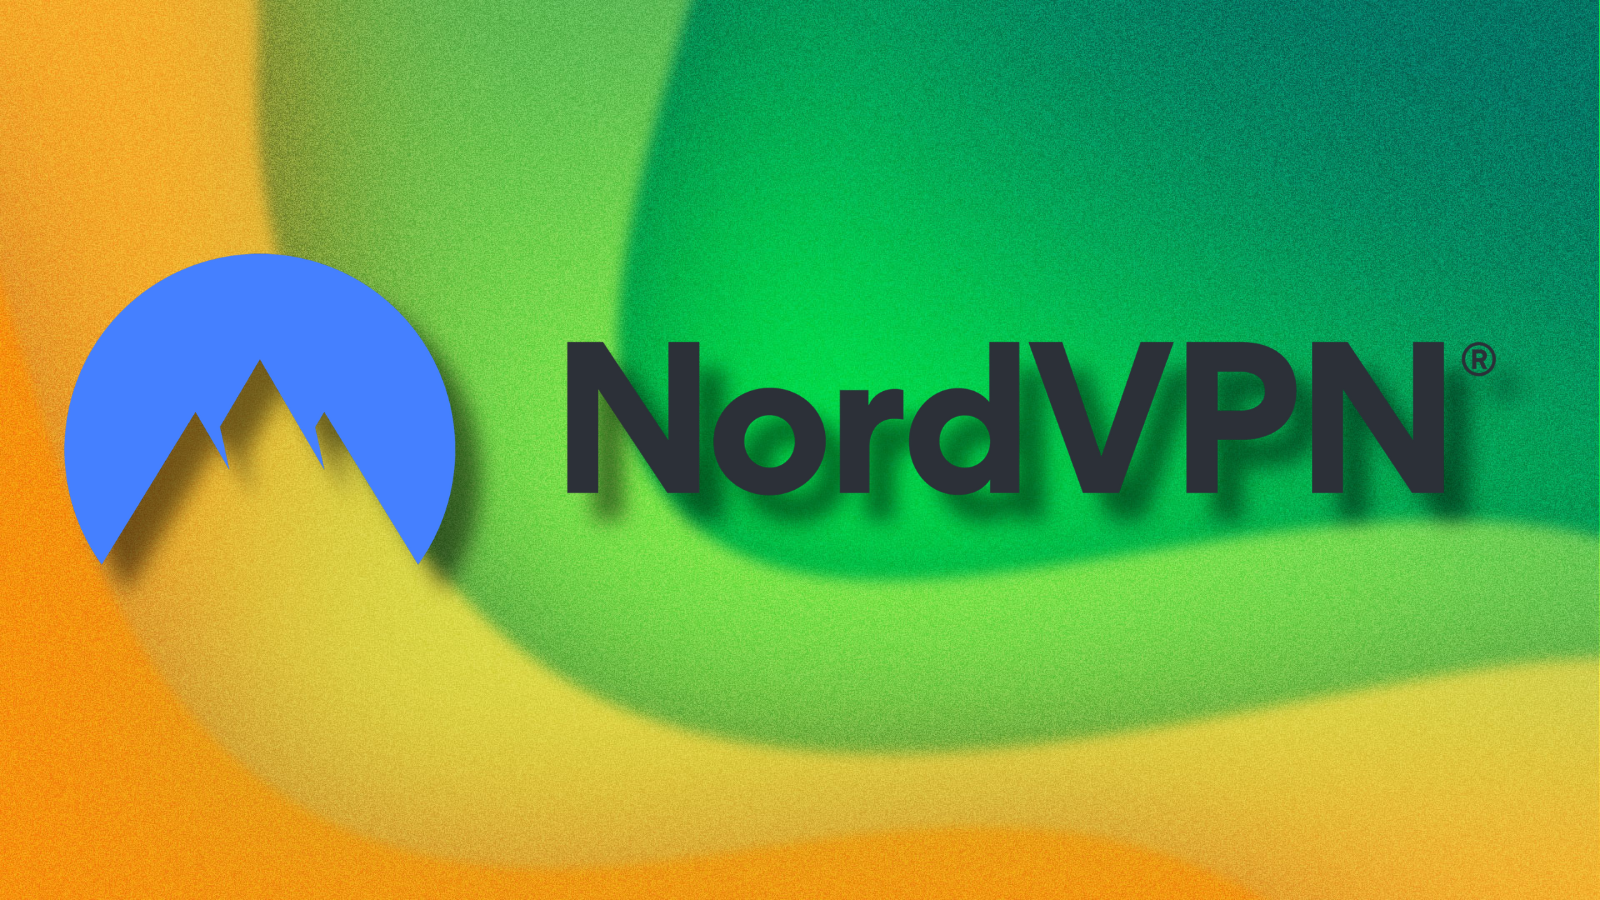 NordVPN logo on green and yellow abstract background